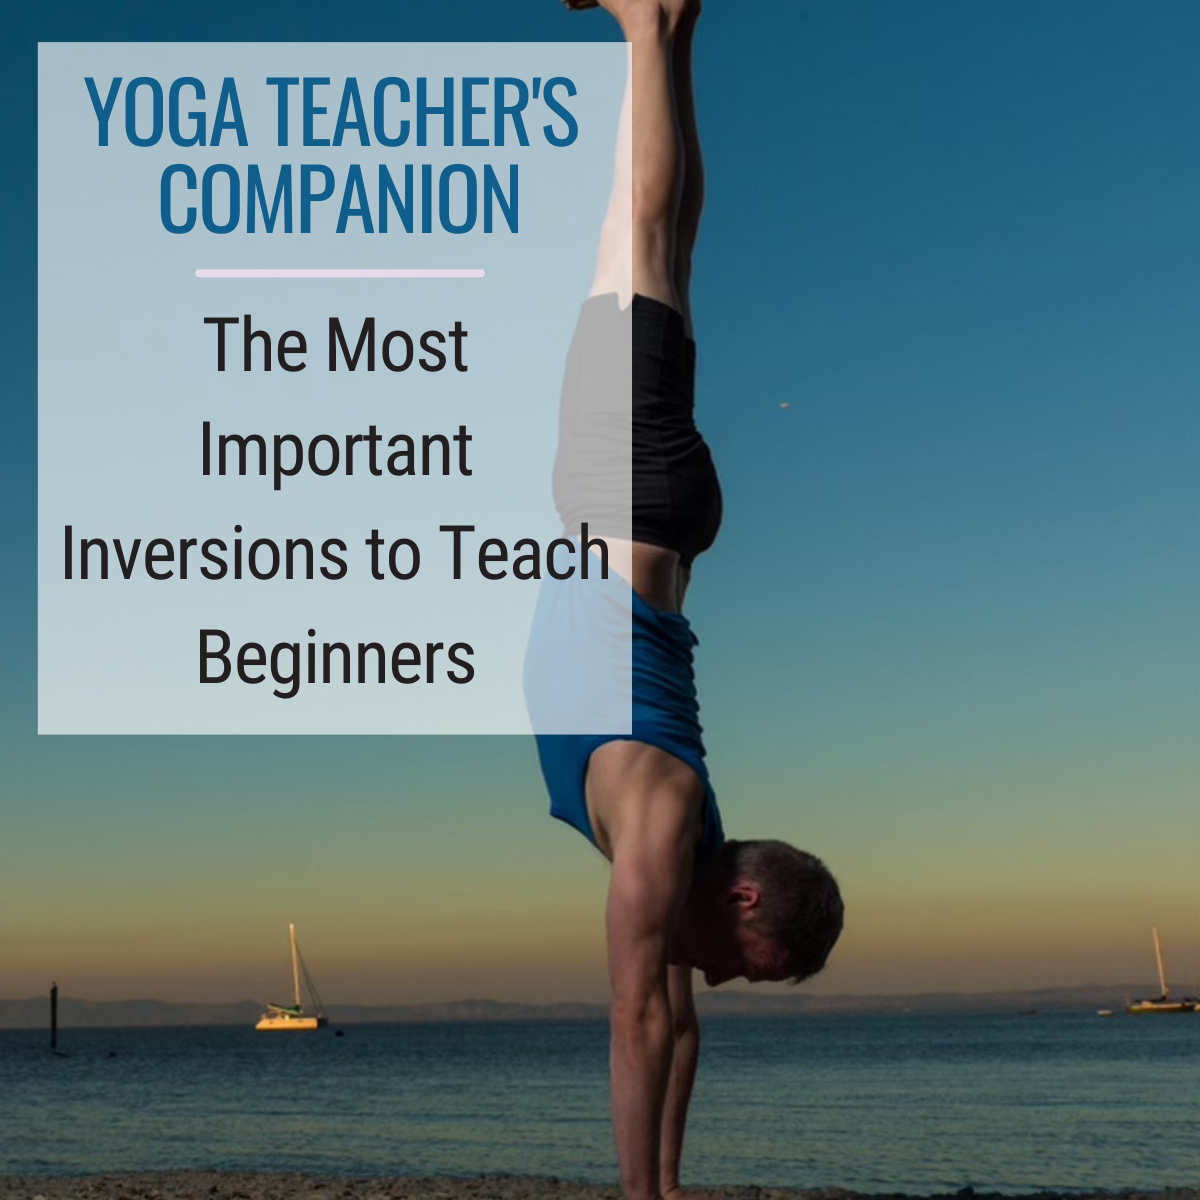 The Truth About Headstand In Yoga - Yoganatomy